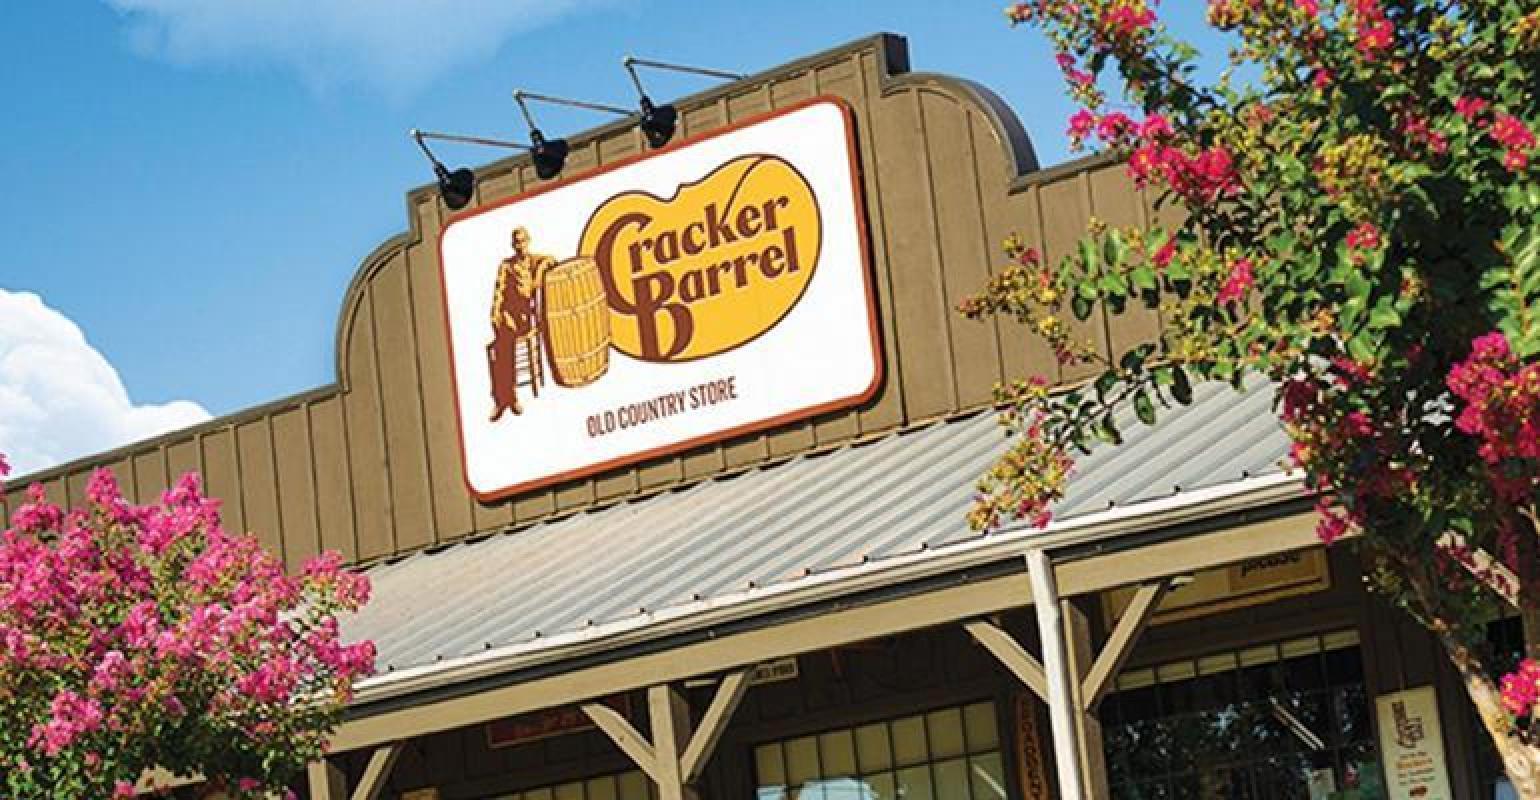 Cracker Barrel Old Country Store expands wine offerings Nation's